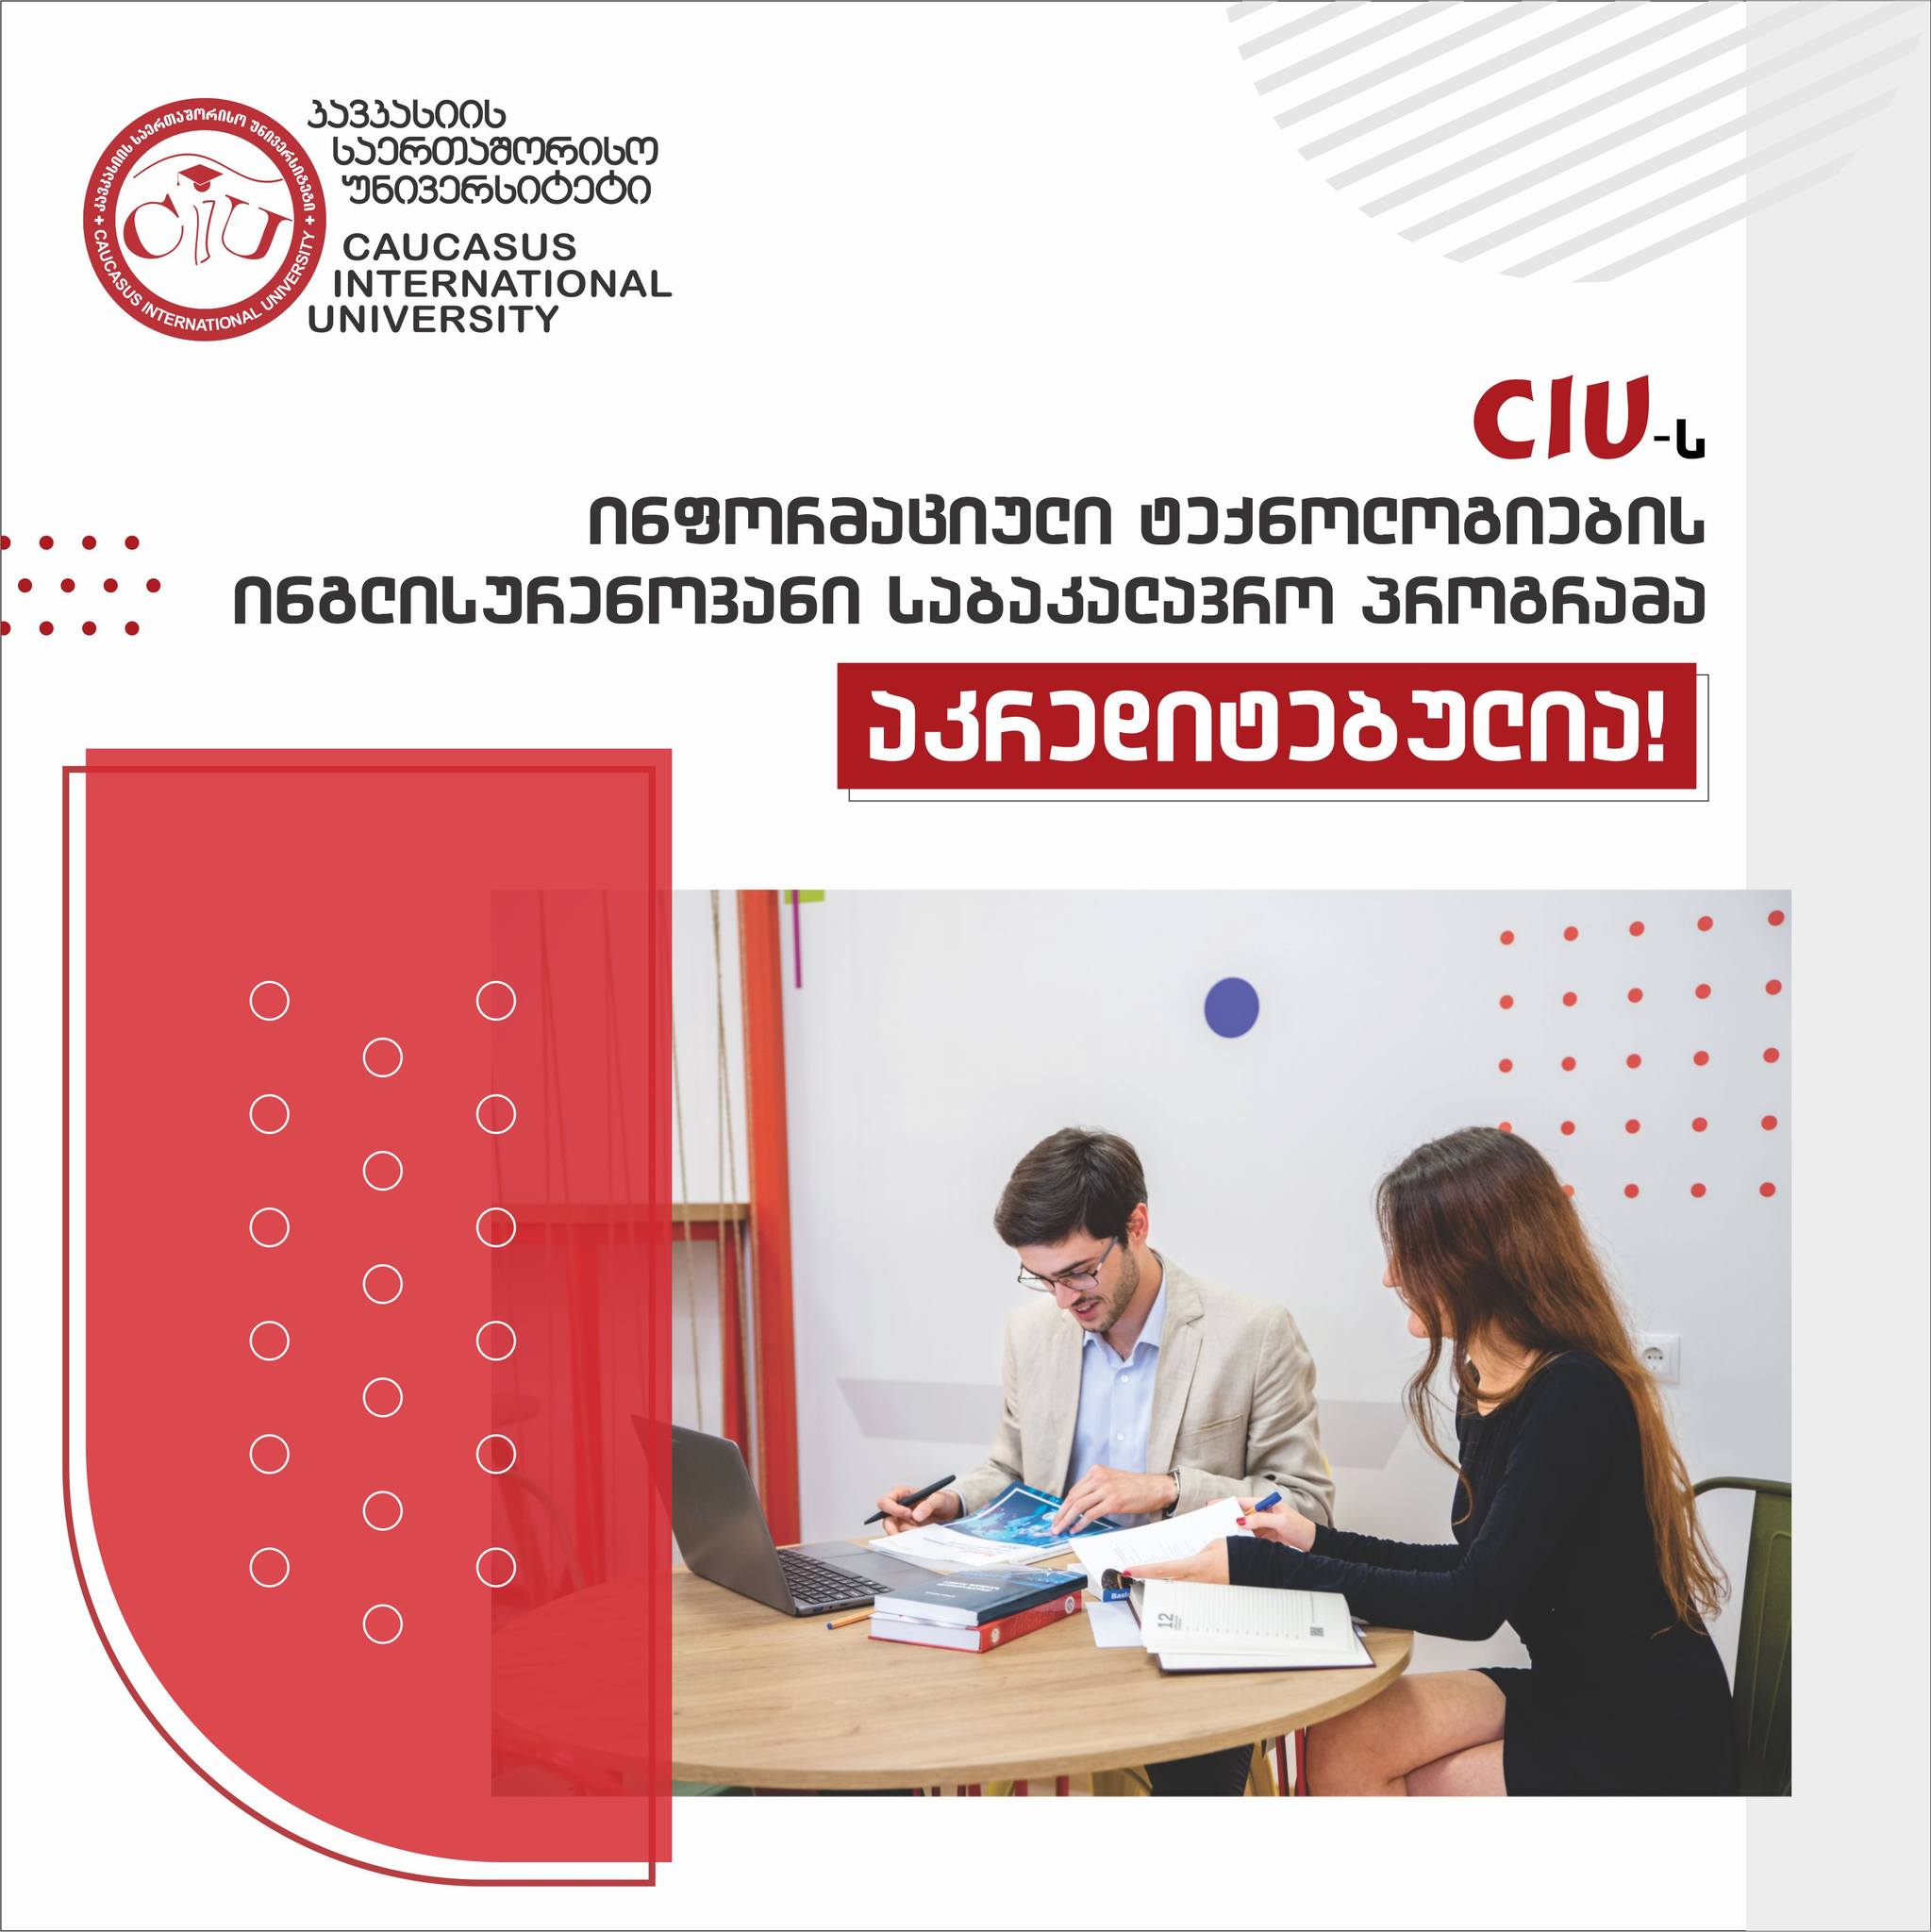 CIU Undergraduate Program in Information Technologies Offered in English Has Been Granted Accreditation